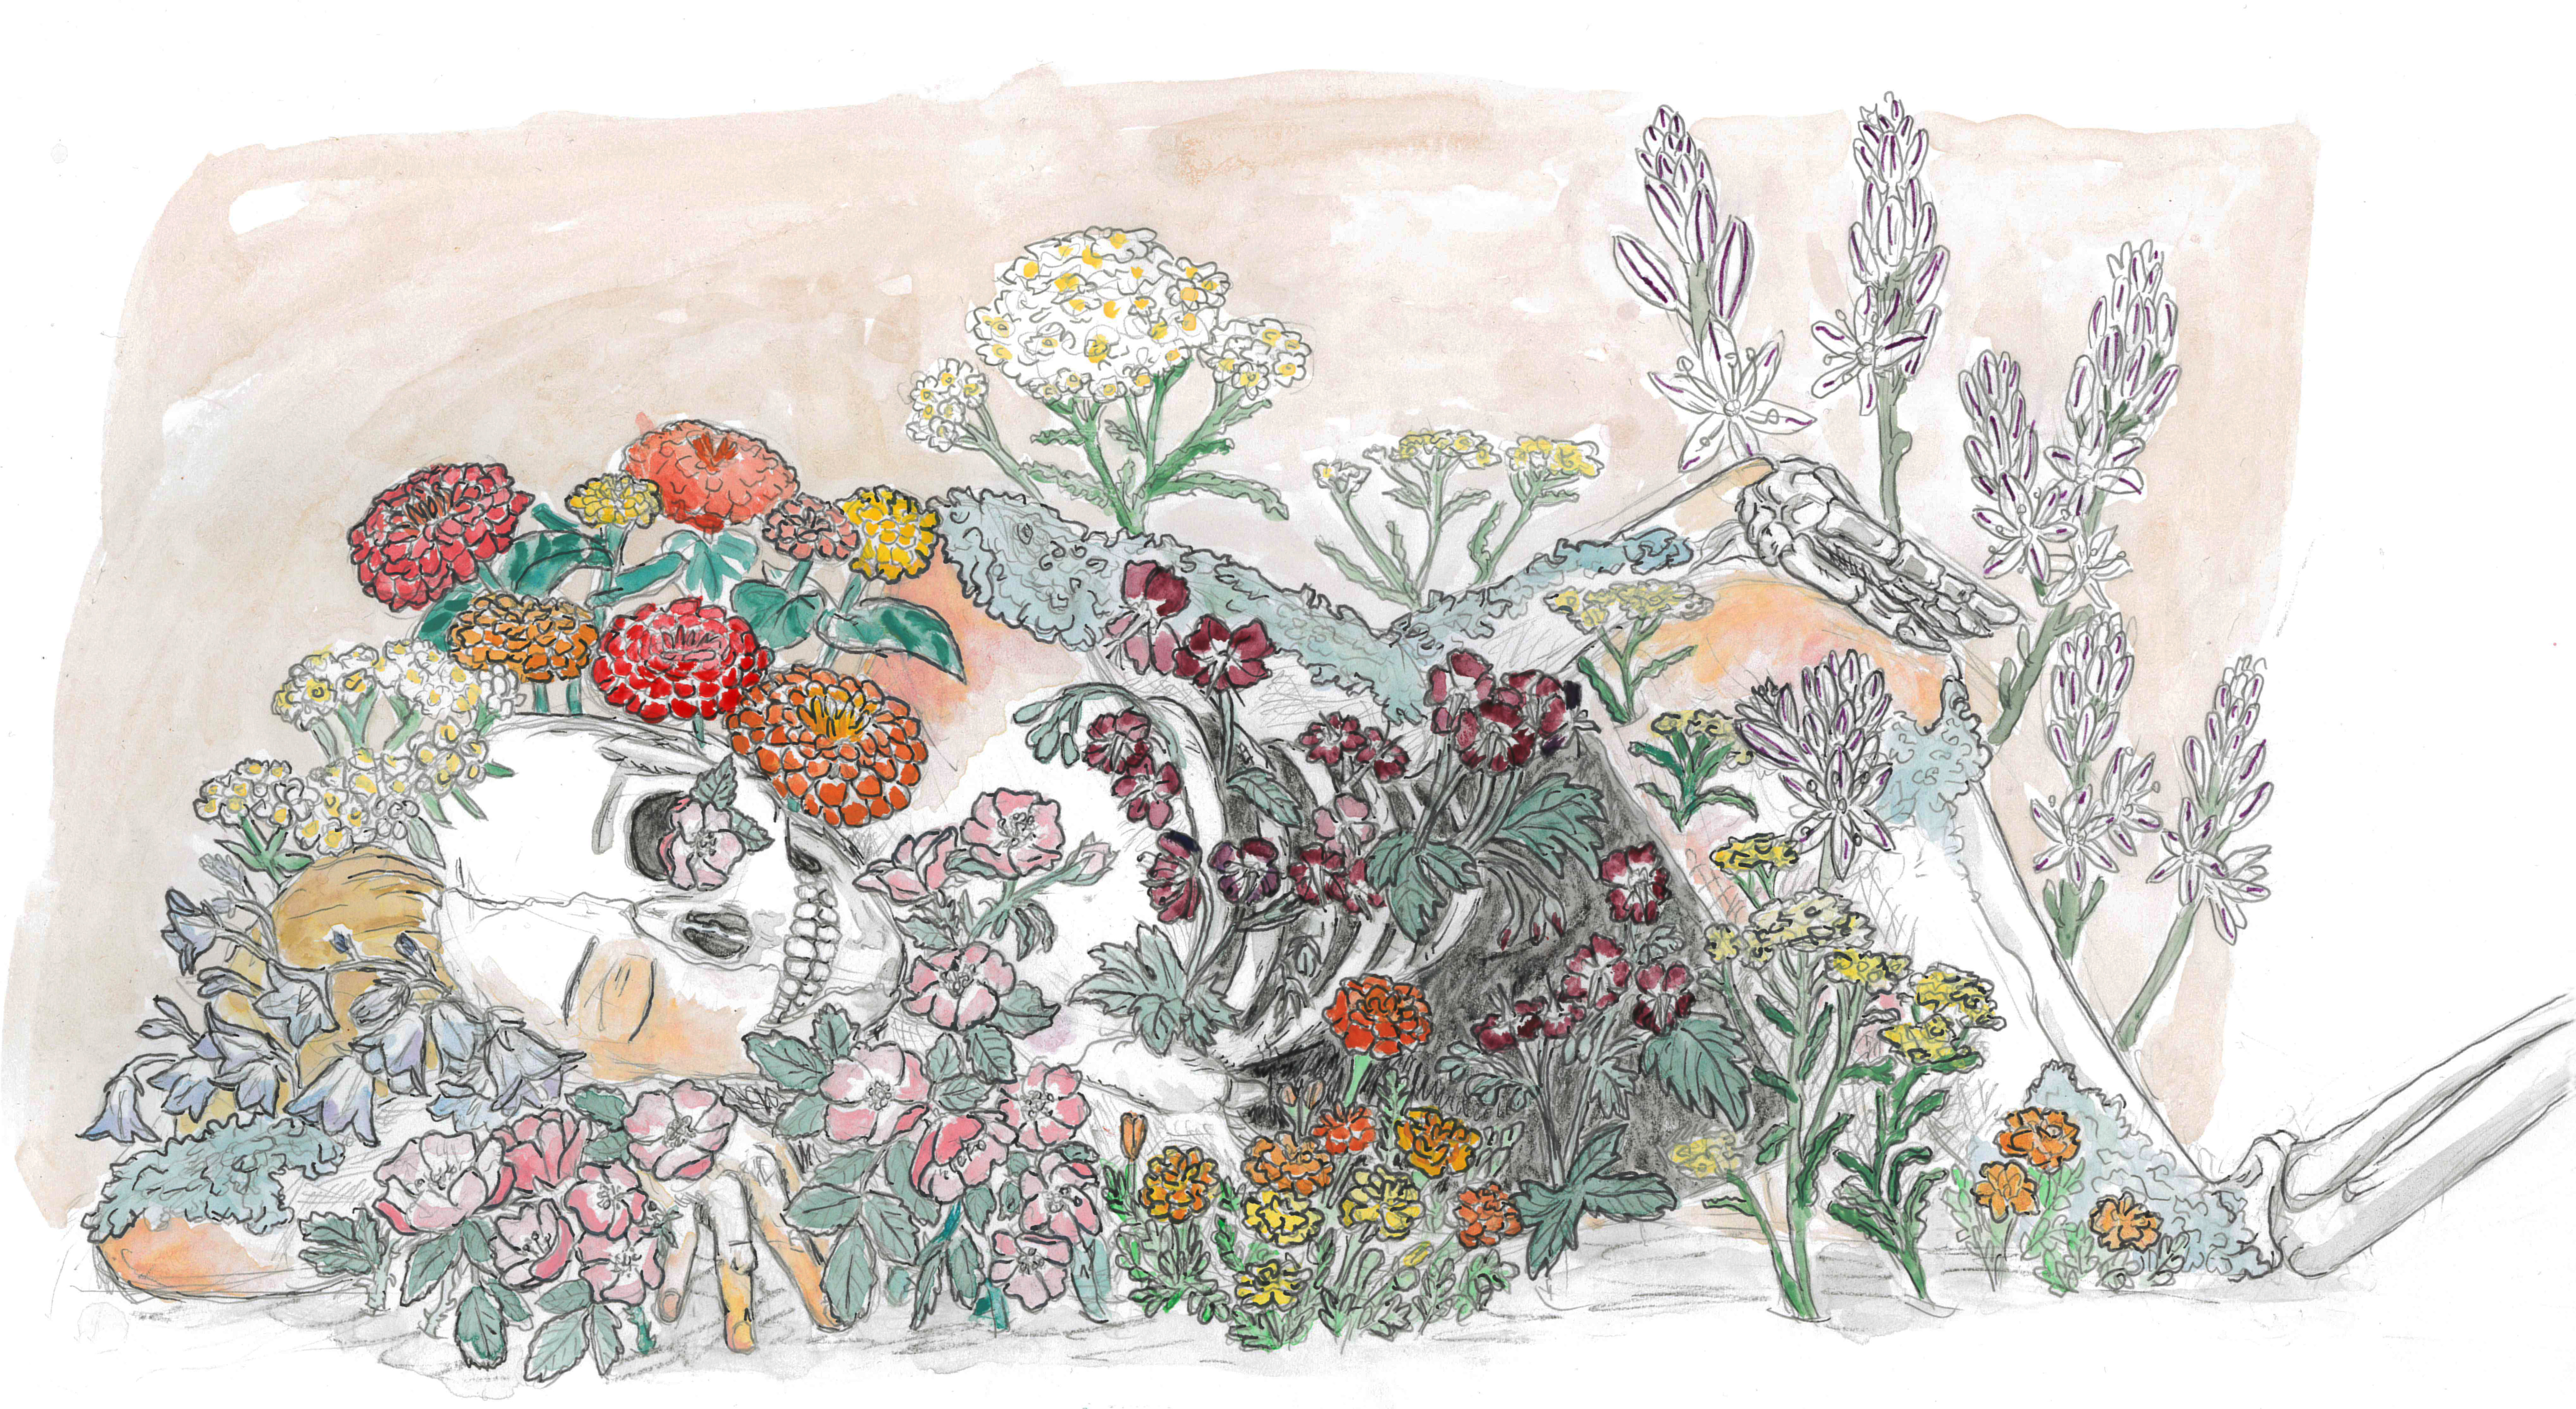 drawing of a body decaying into a skeleton with flowers and plants growing up around it